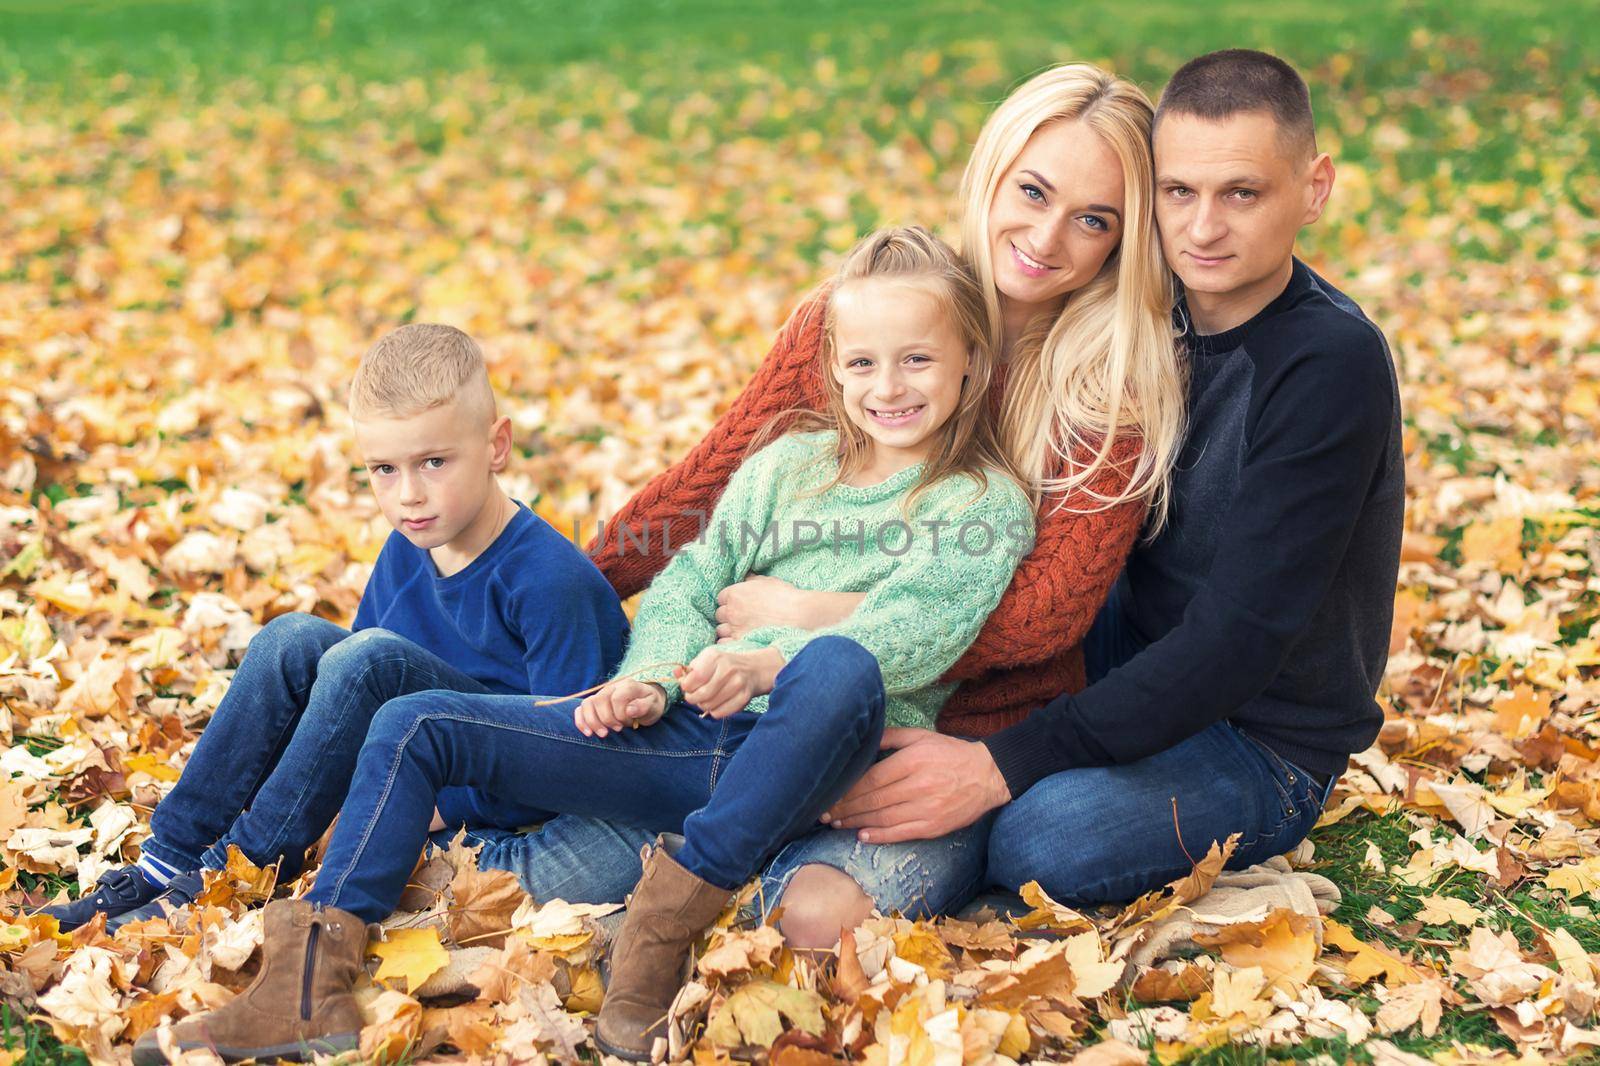 Portrait of young family sitting in autumn leaves. Parents with children sitting in the autumn park